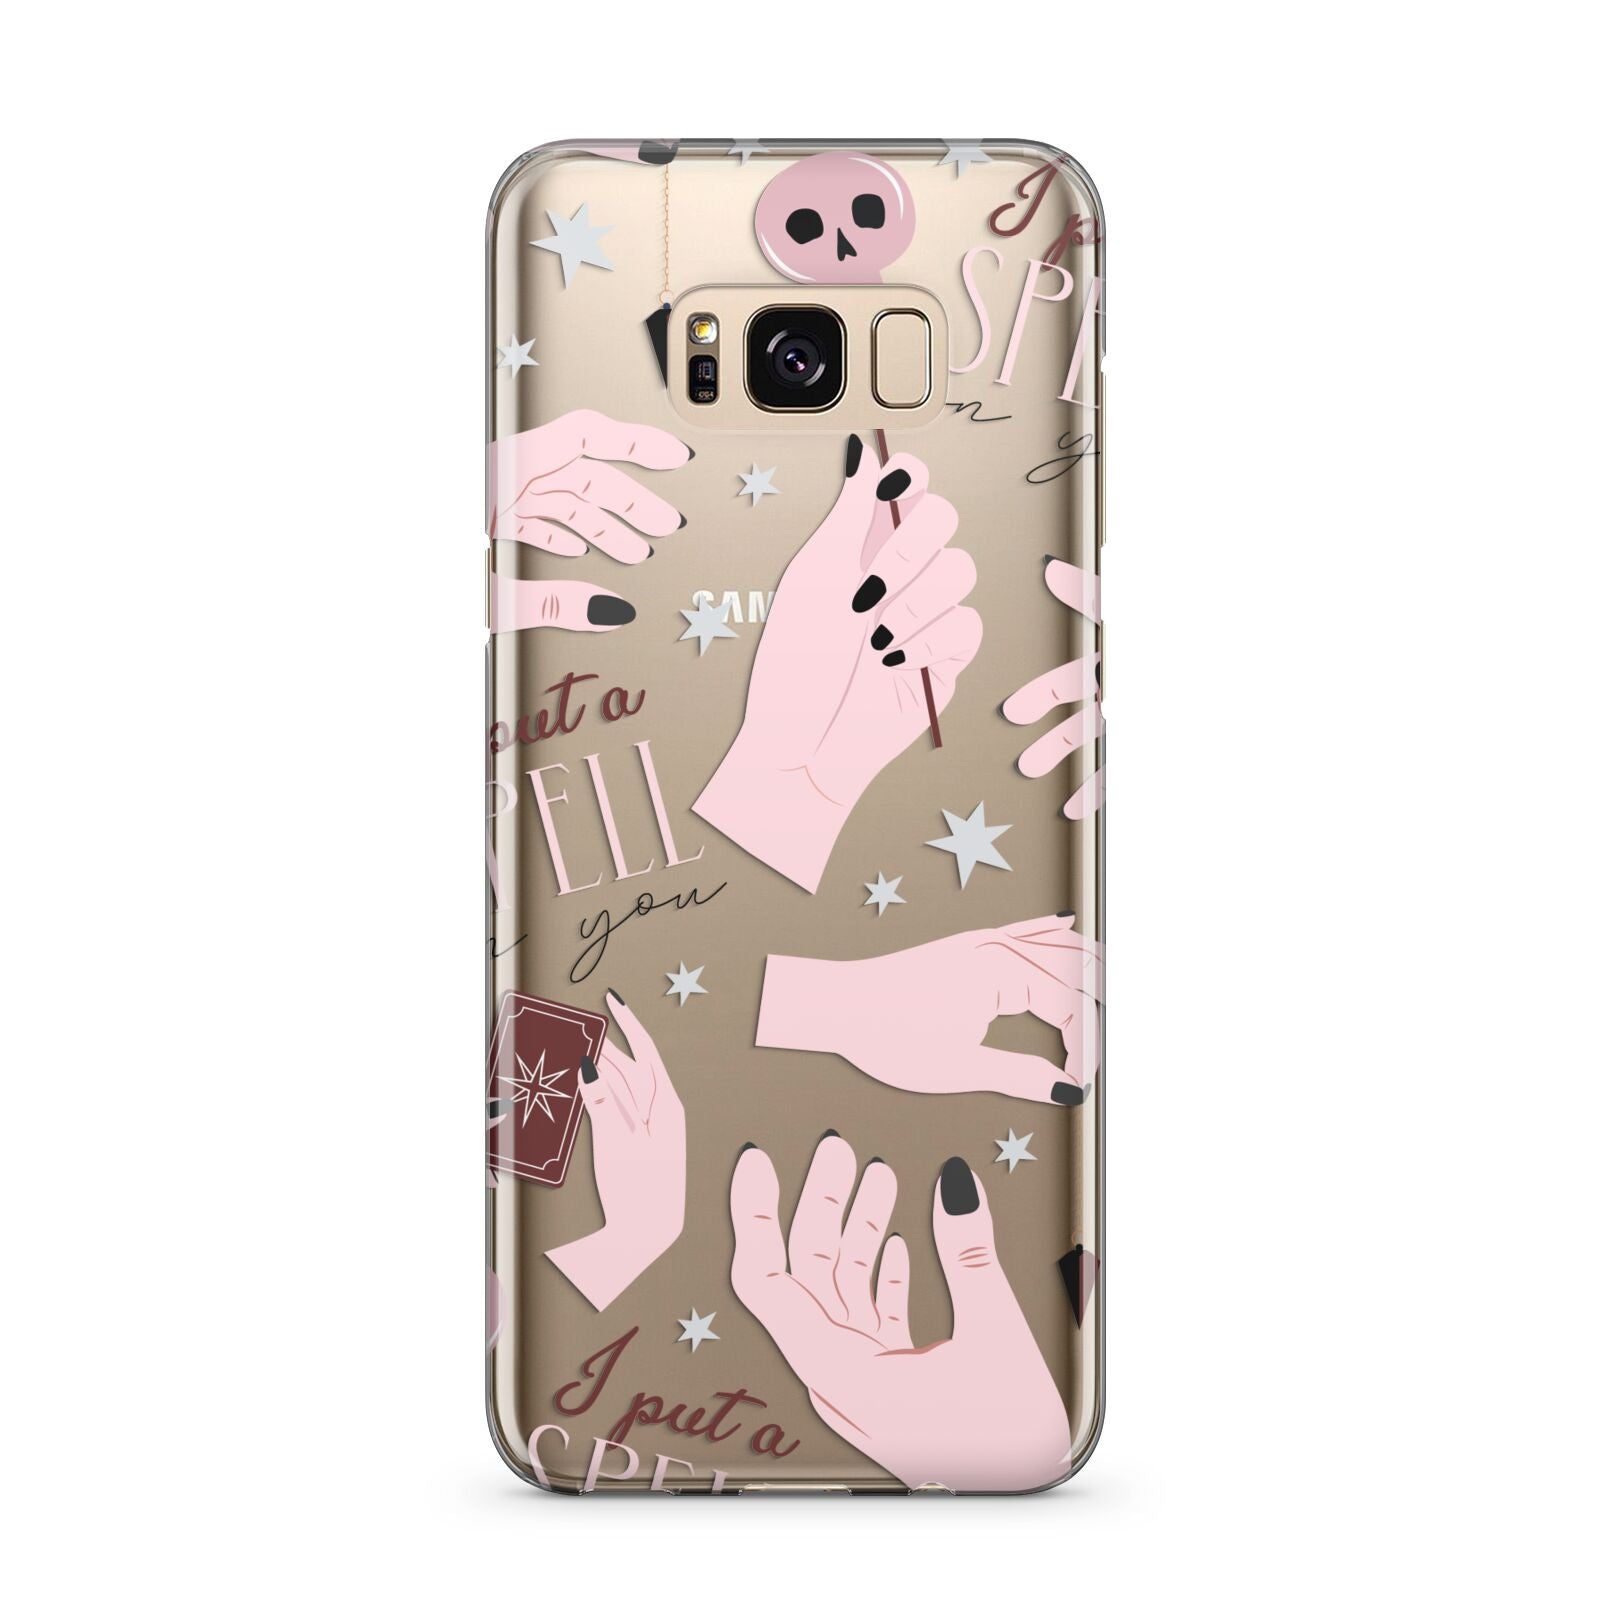 Witches Hands and Tarot Cards Samsung Galaxy S8 Plus Case